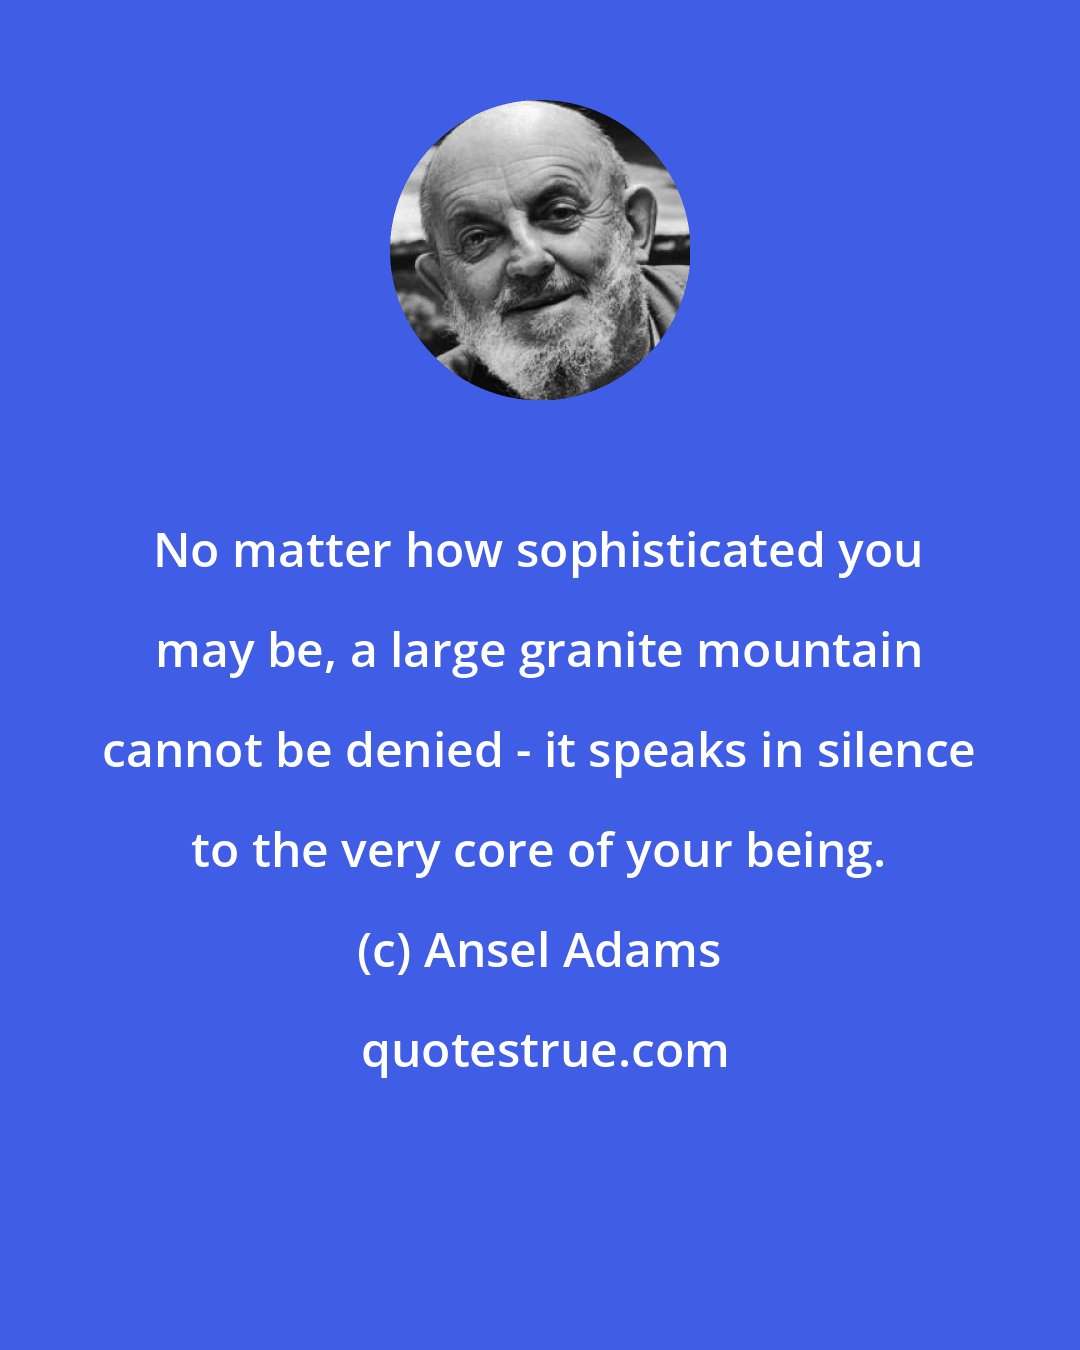 Ansel Adams: No matter how sophisticated you may be, a large granite mountain cannot be denied - it speaks in silence to the very core of your being.